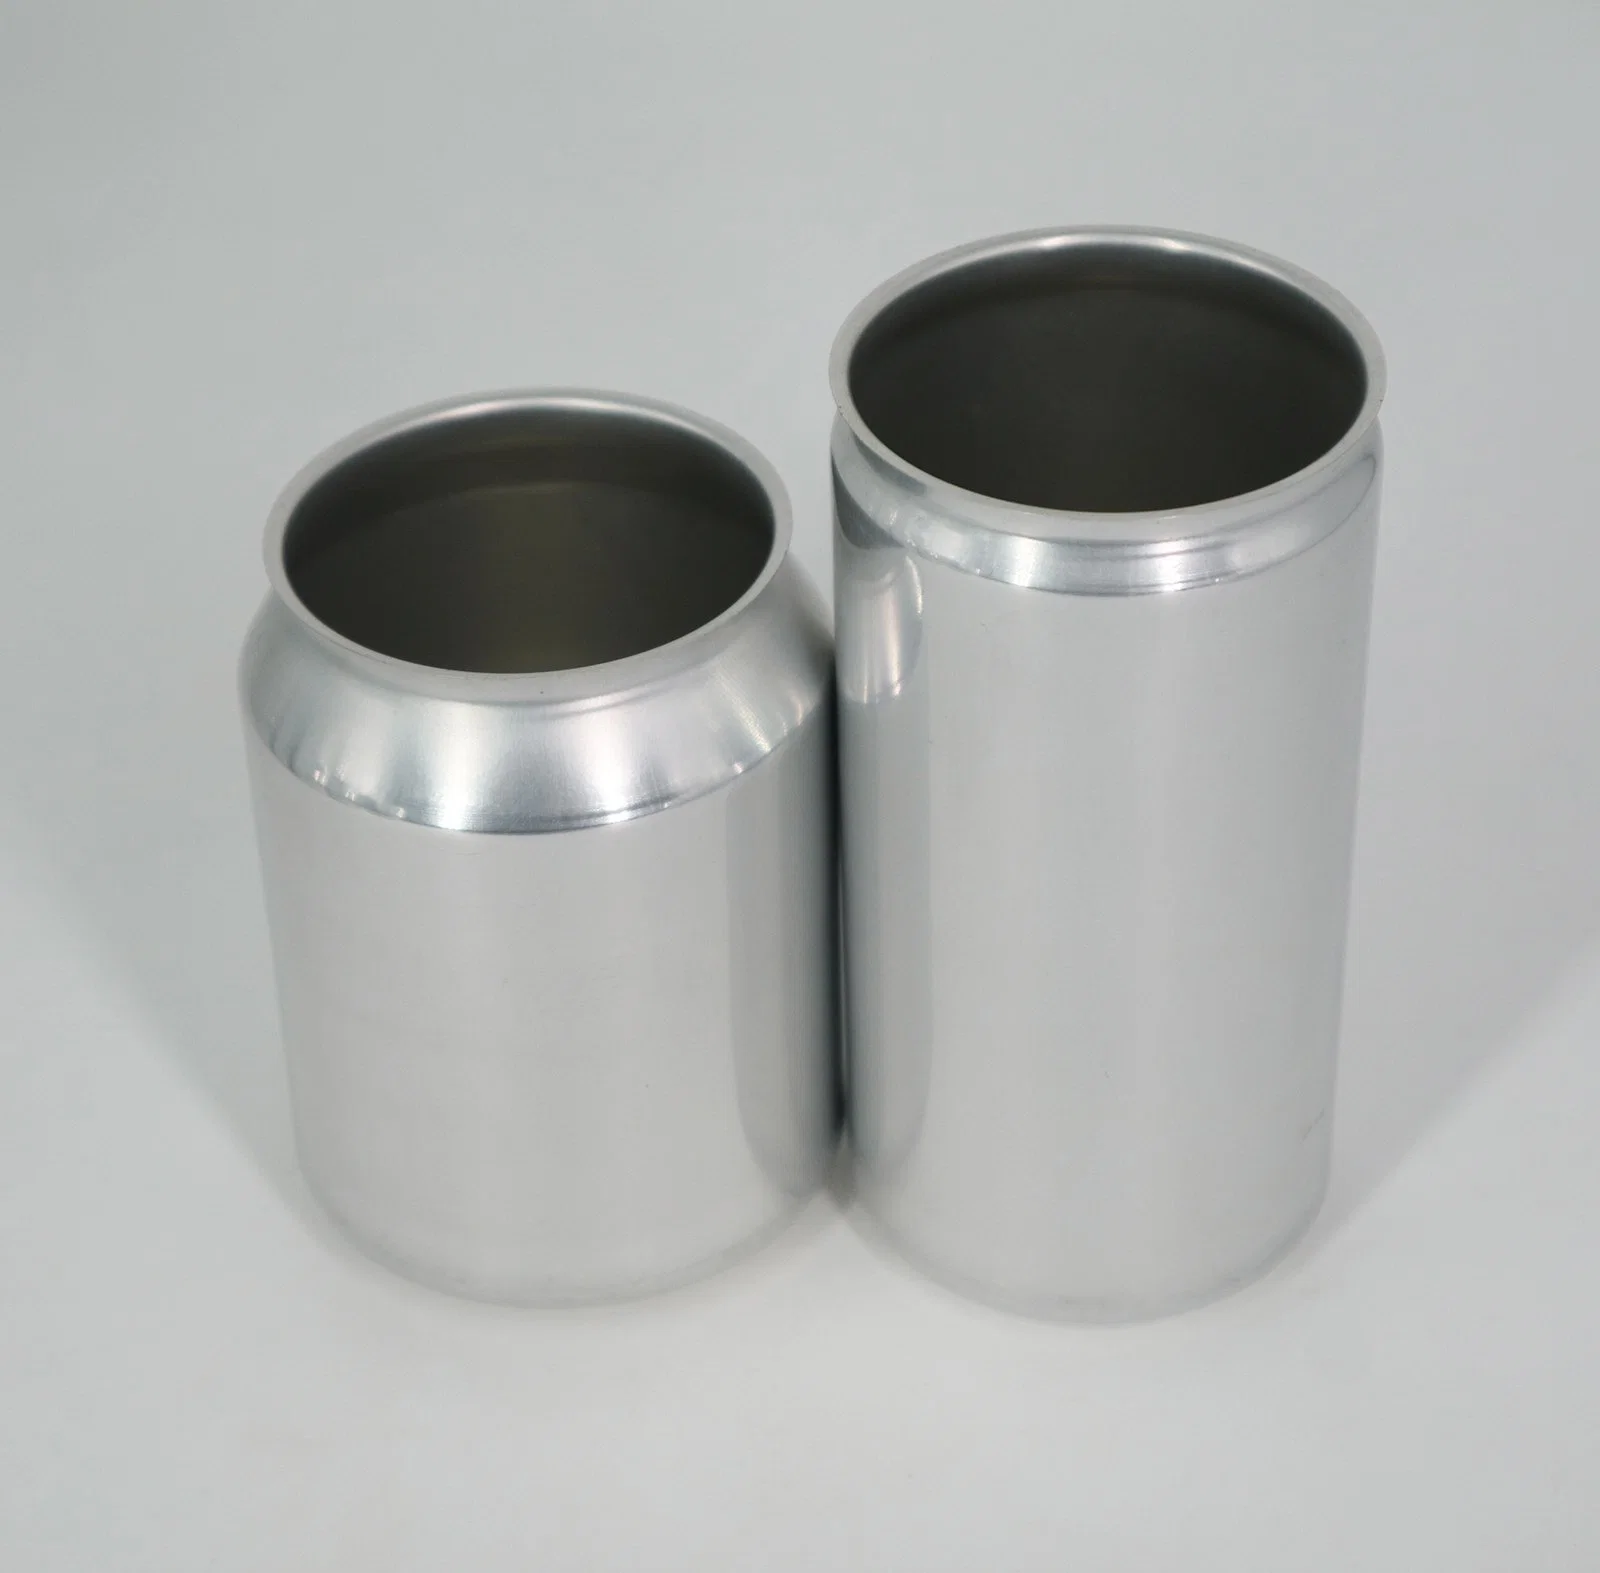 China 250ml Blank Empty Aluminum Pop Can for Beer Soda Cola Juice Energy Drink Water Free Samples